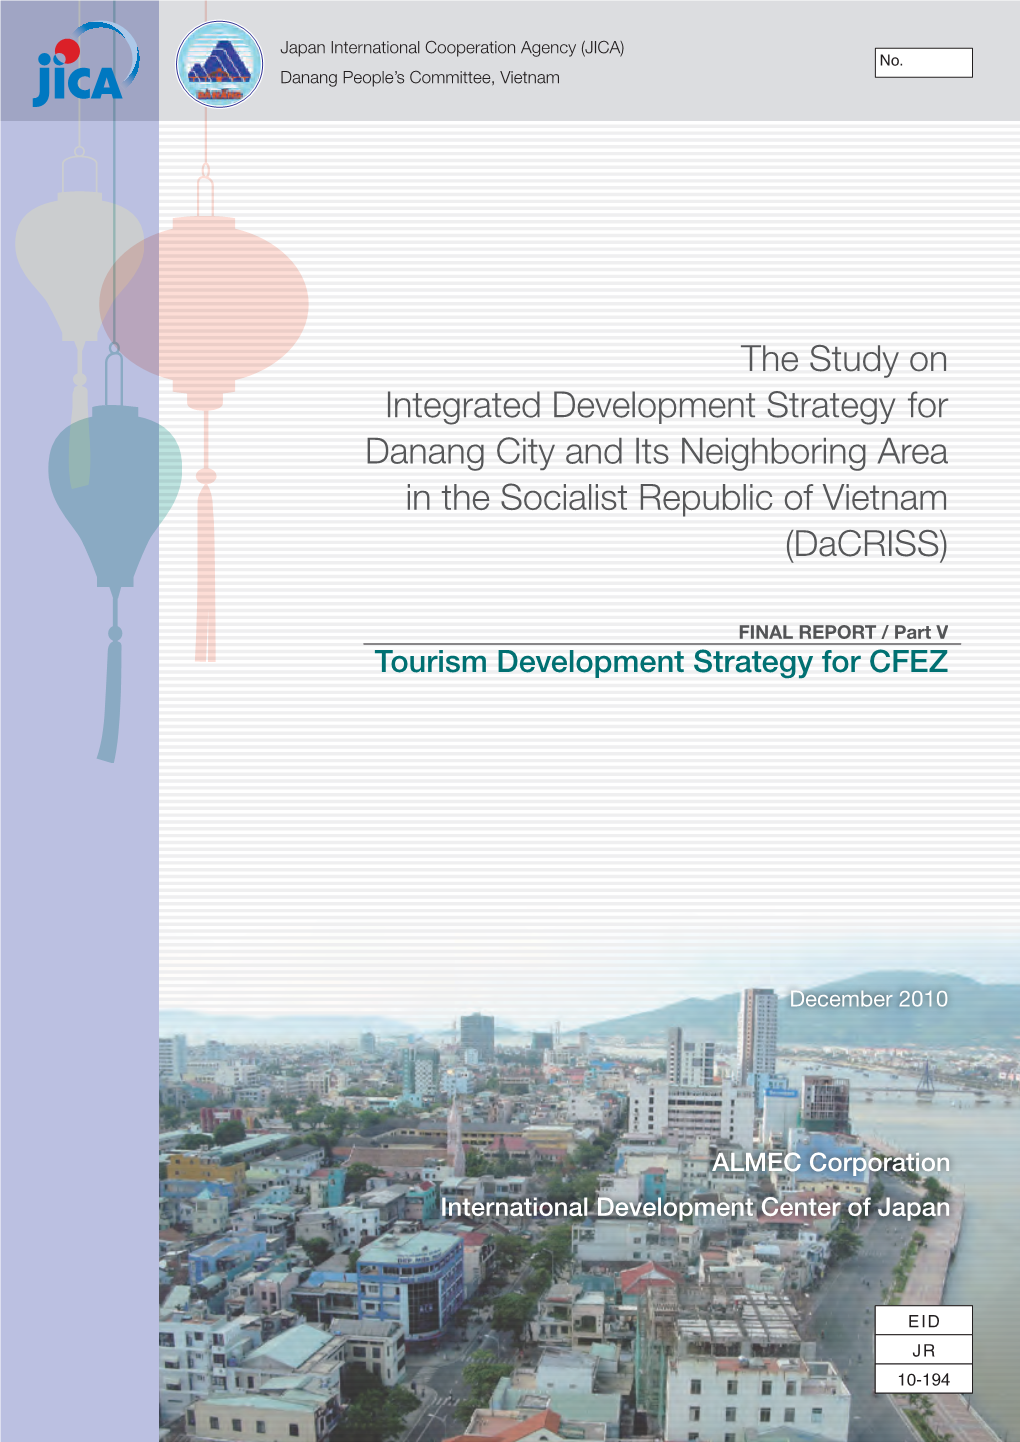 The Study on Integrated Development Strategy for Danang City and Its